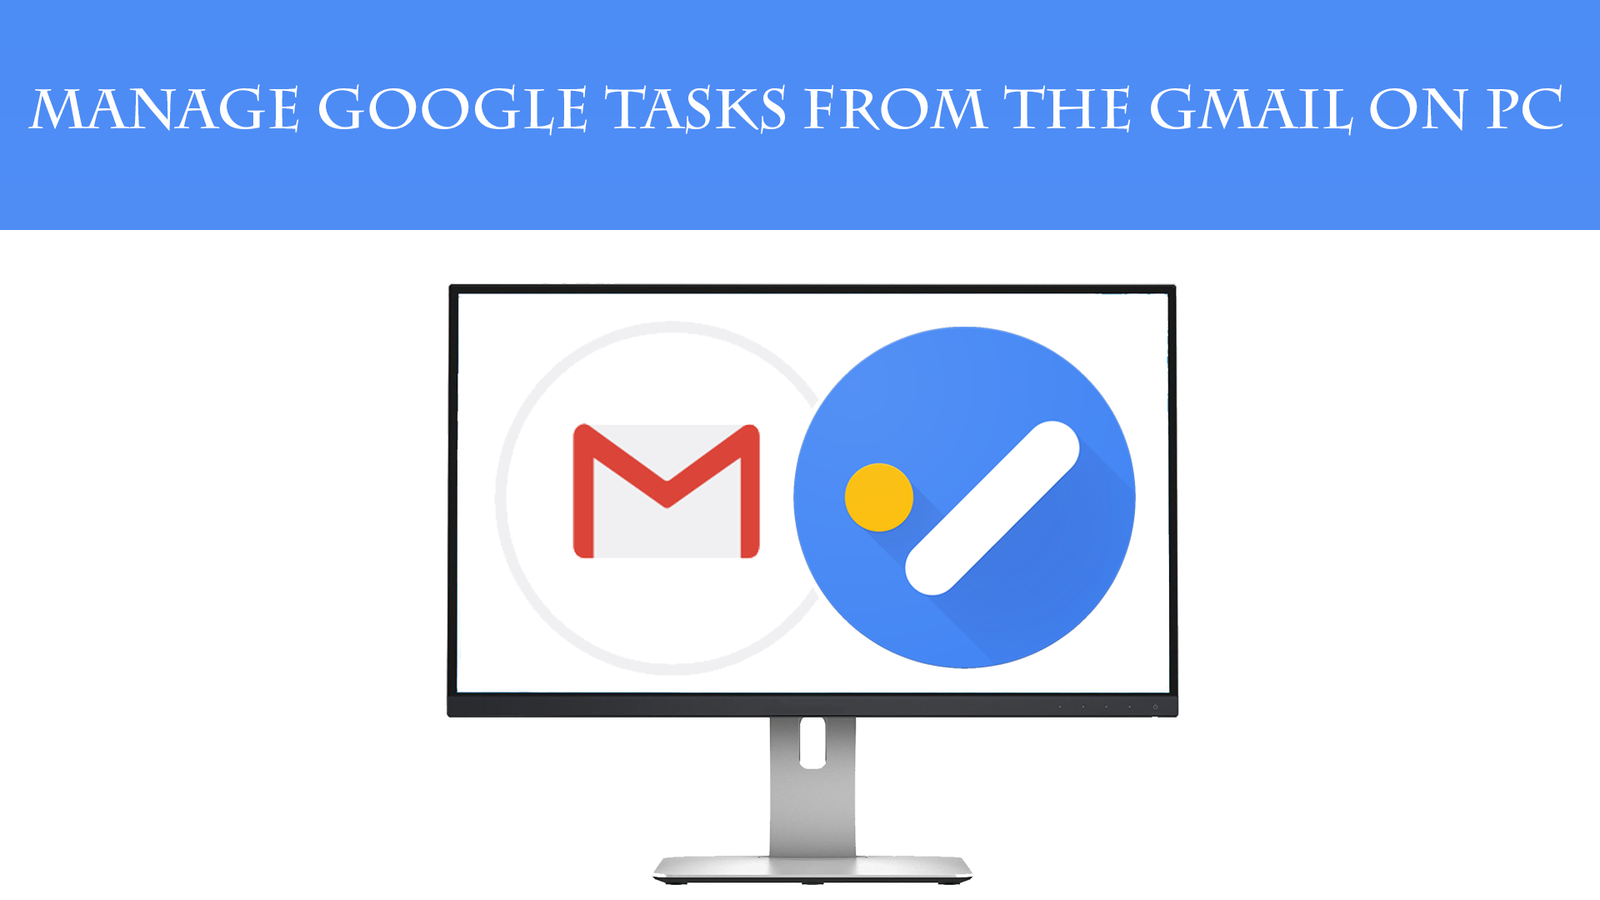 Manage Google Tasks from the Gmail on PC